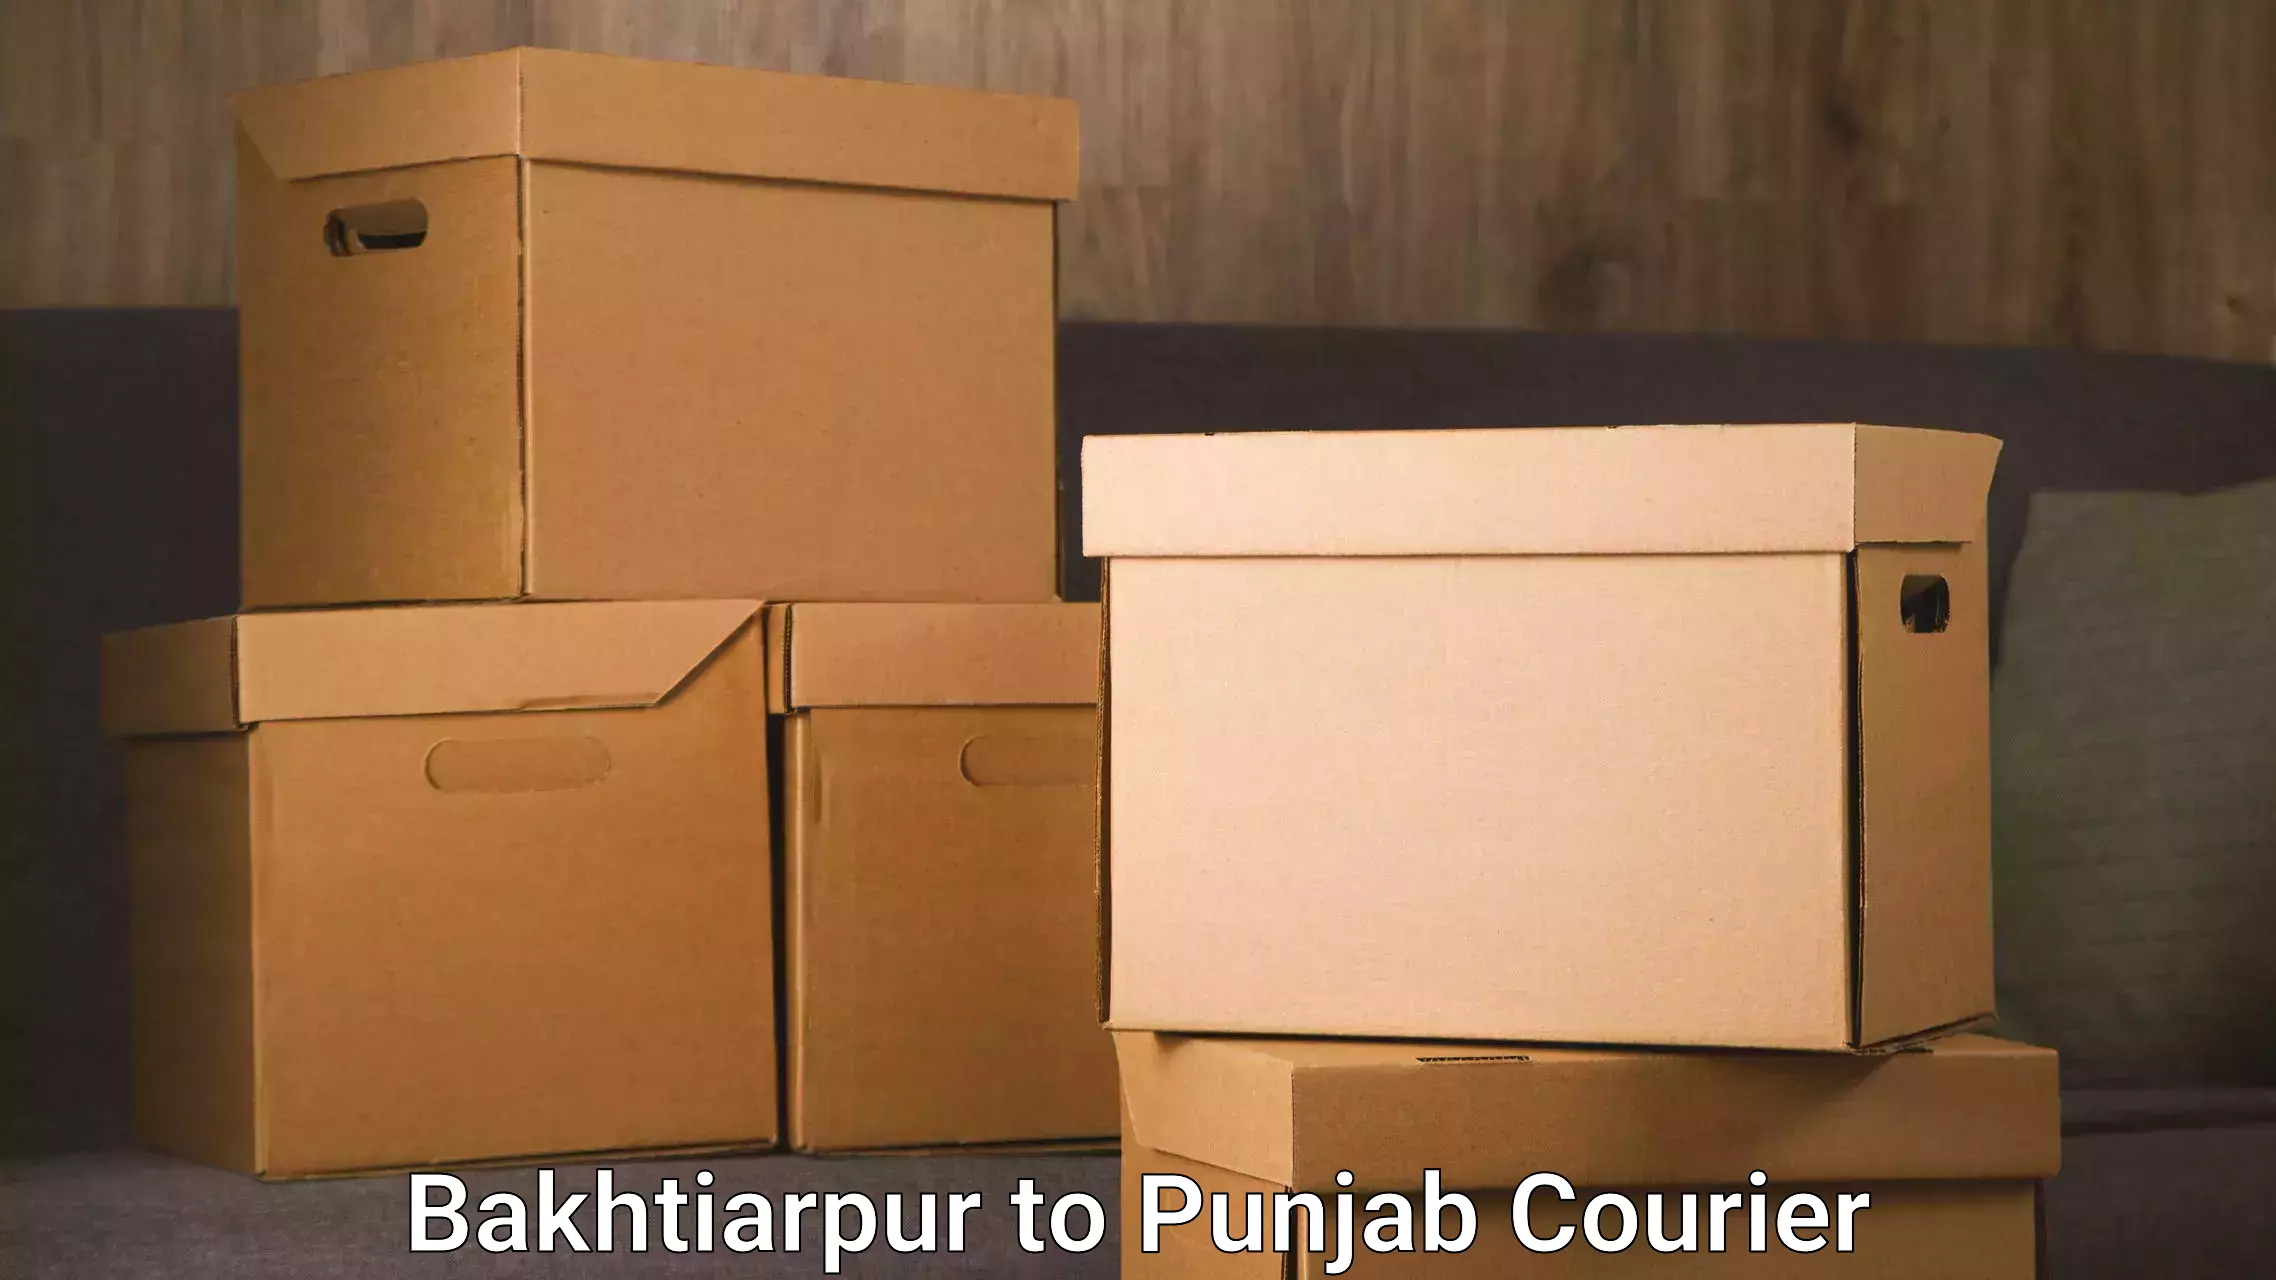 High-quality moving services in Bakhtiarpur to Dhuri